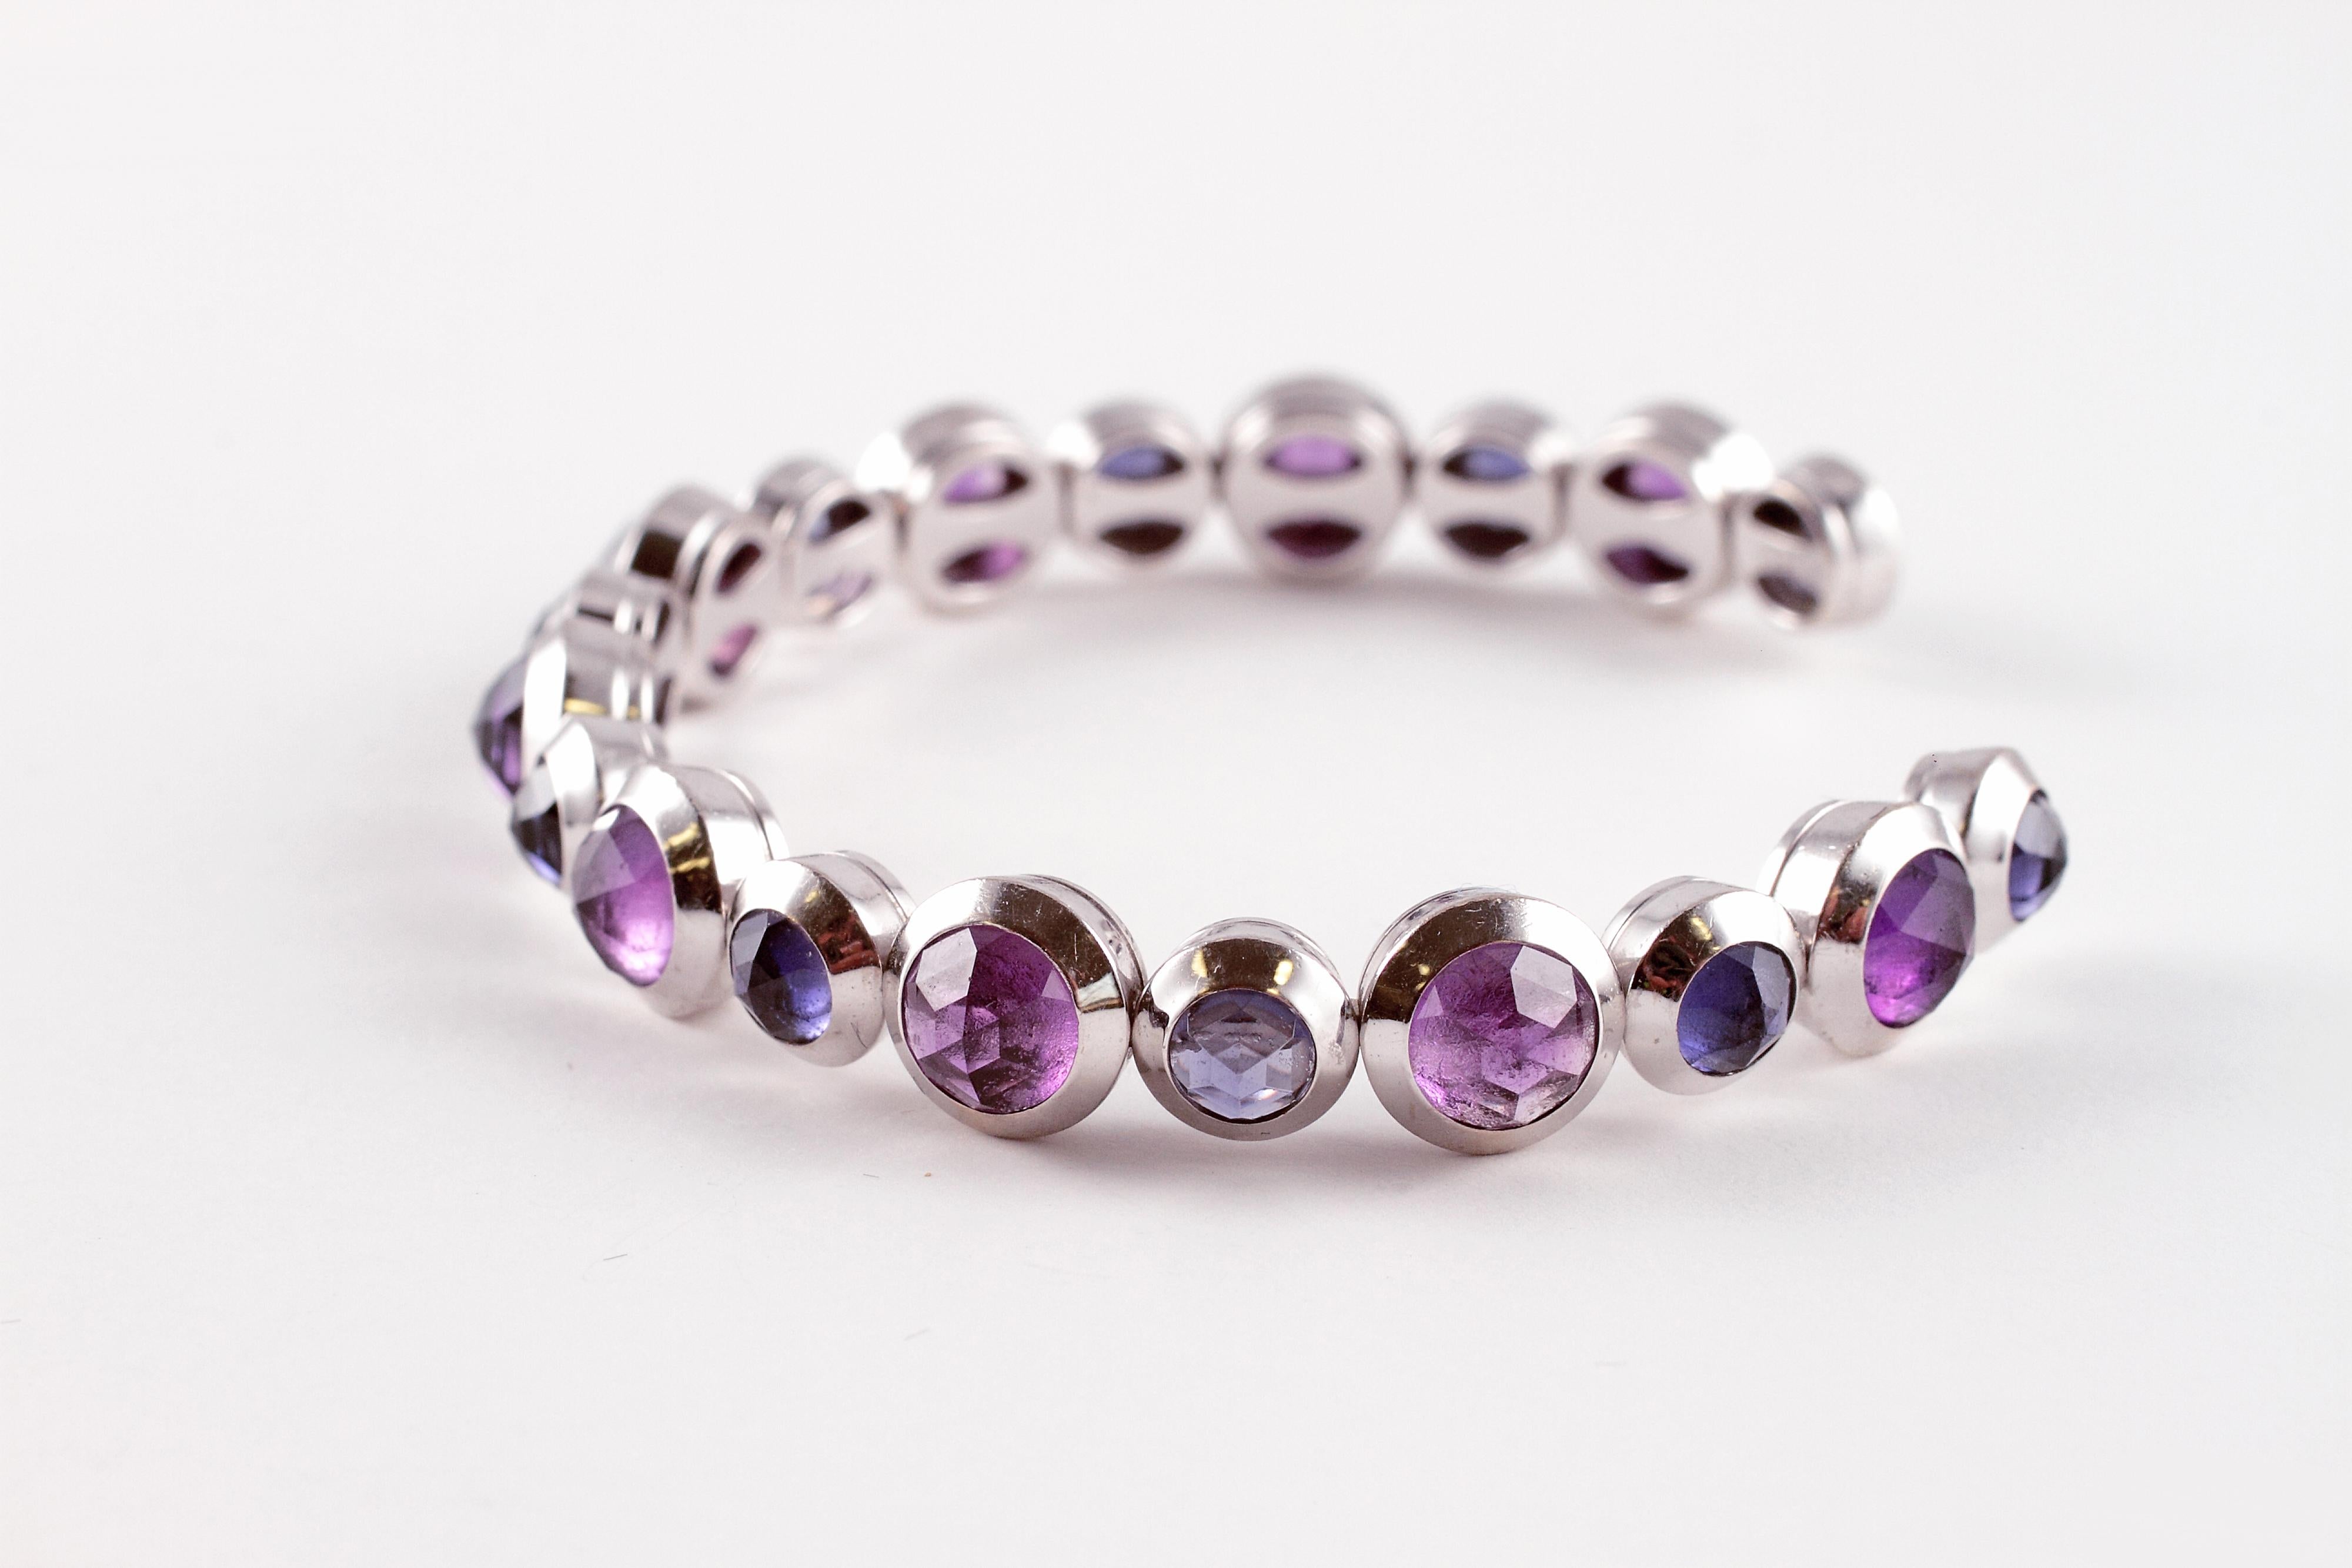 Rose-cut stones are so stunning and a bit out of the norm! This striking 18 karat white gold, cuff bracelet by Tiffany is a great example. With rose-cut iolites and amethysts, this bracelet would make any heart race!